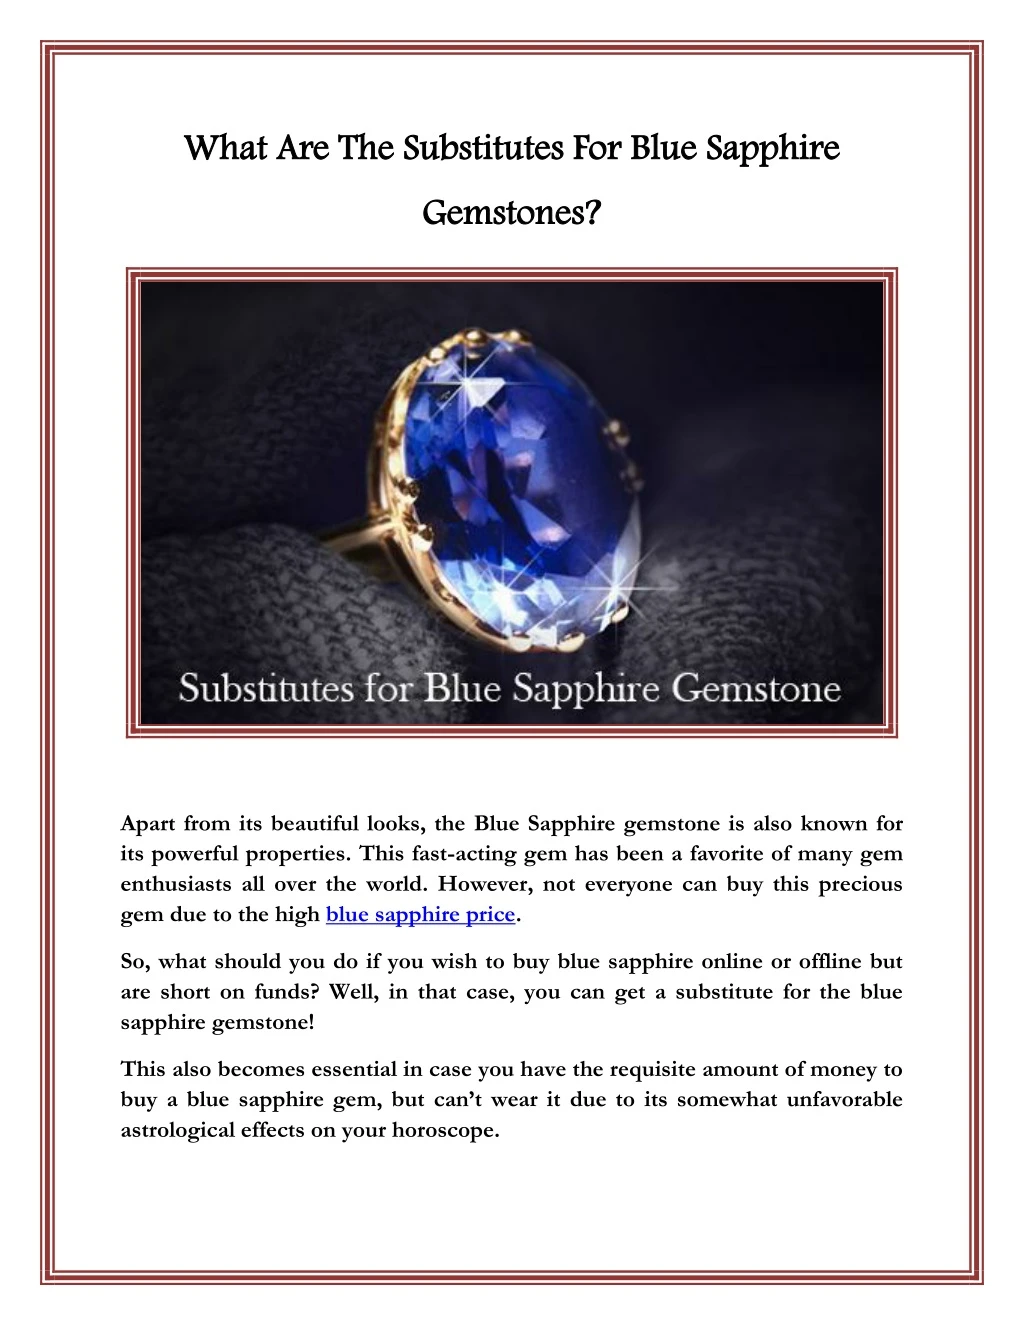 what are the substitutes for blue sapphire